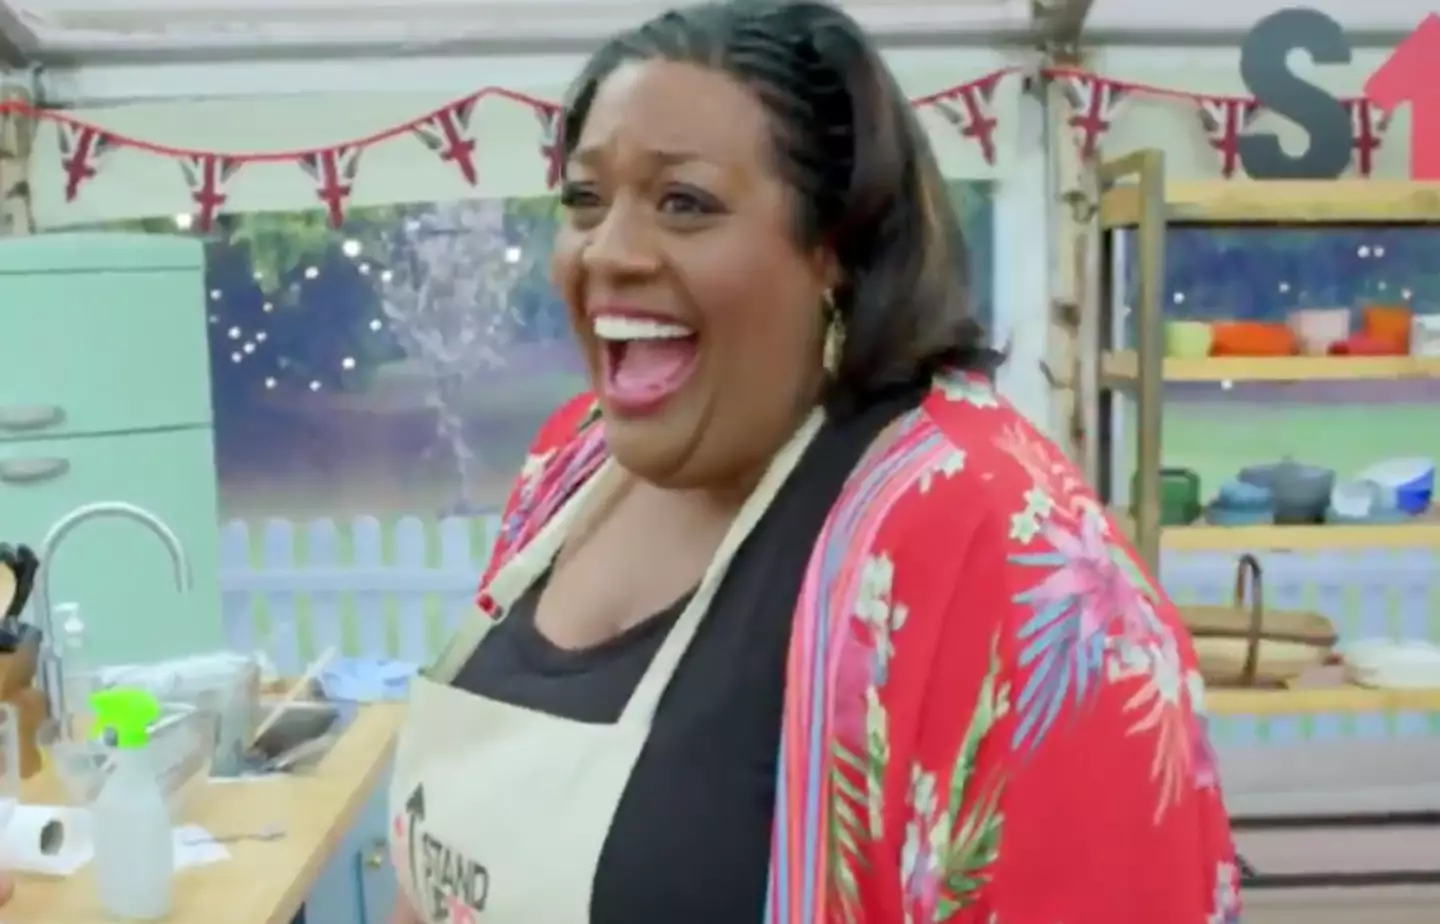 Hammond's already appeared on GBBO on the Stand Up 2 Cancer celebrity special.